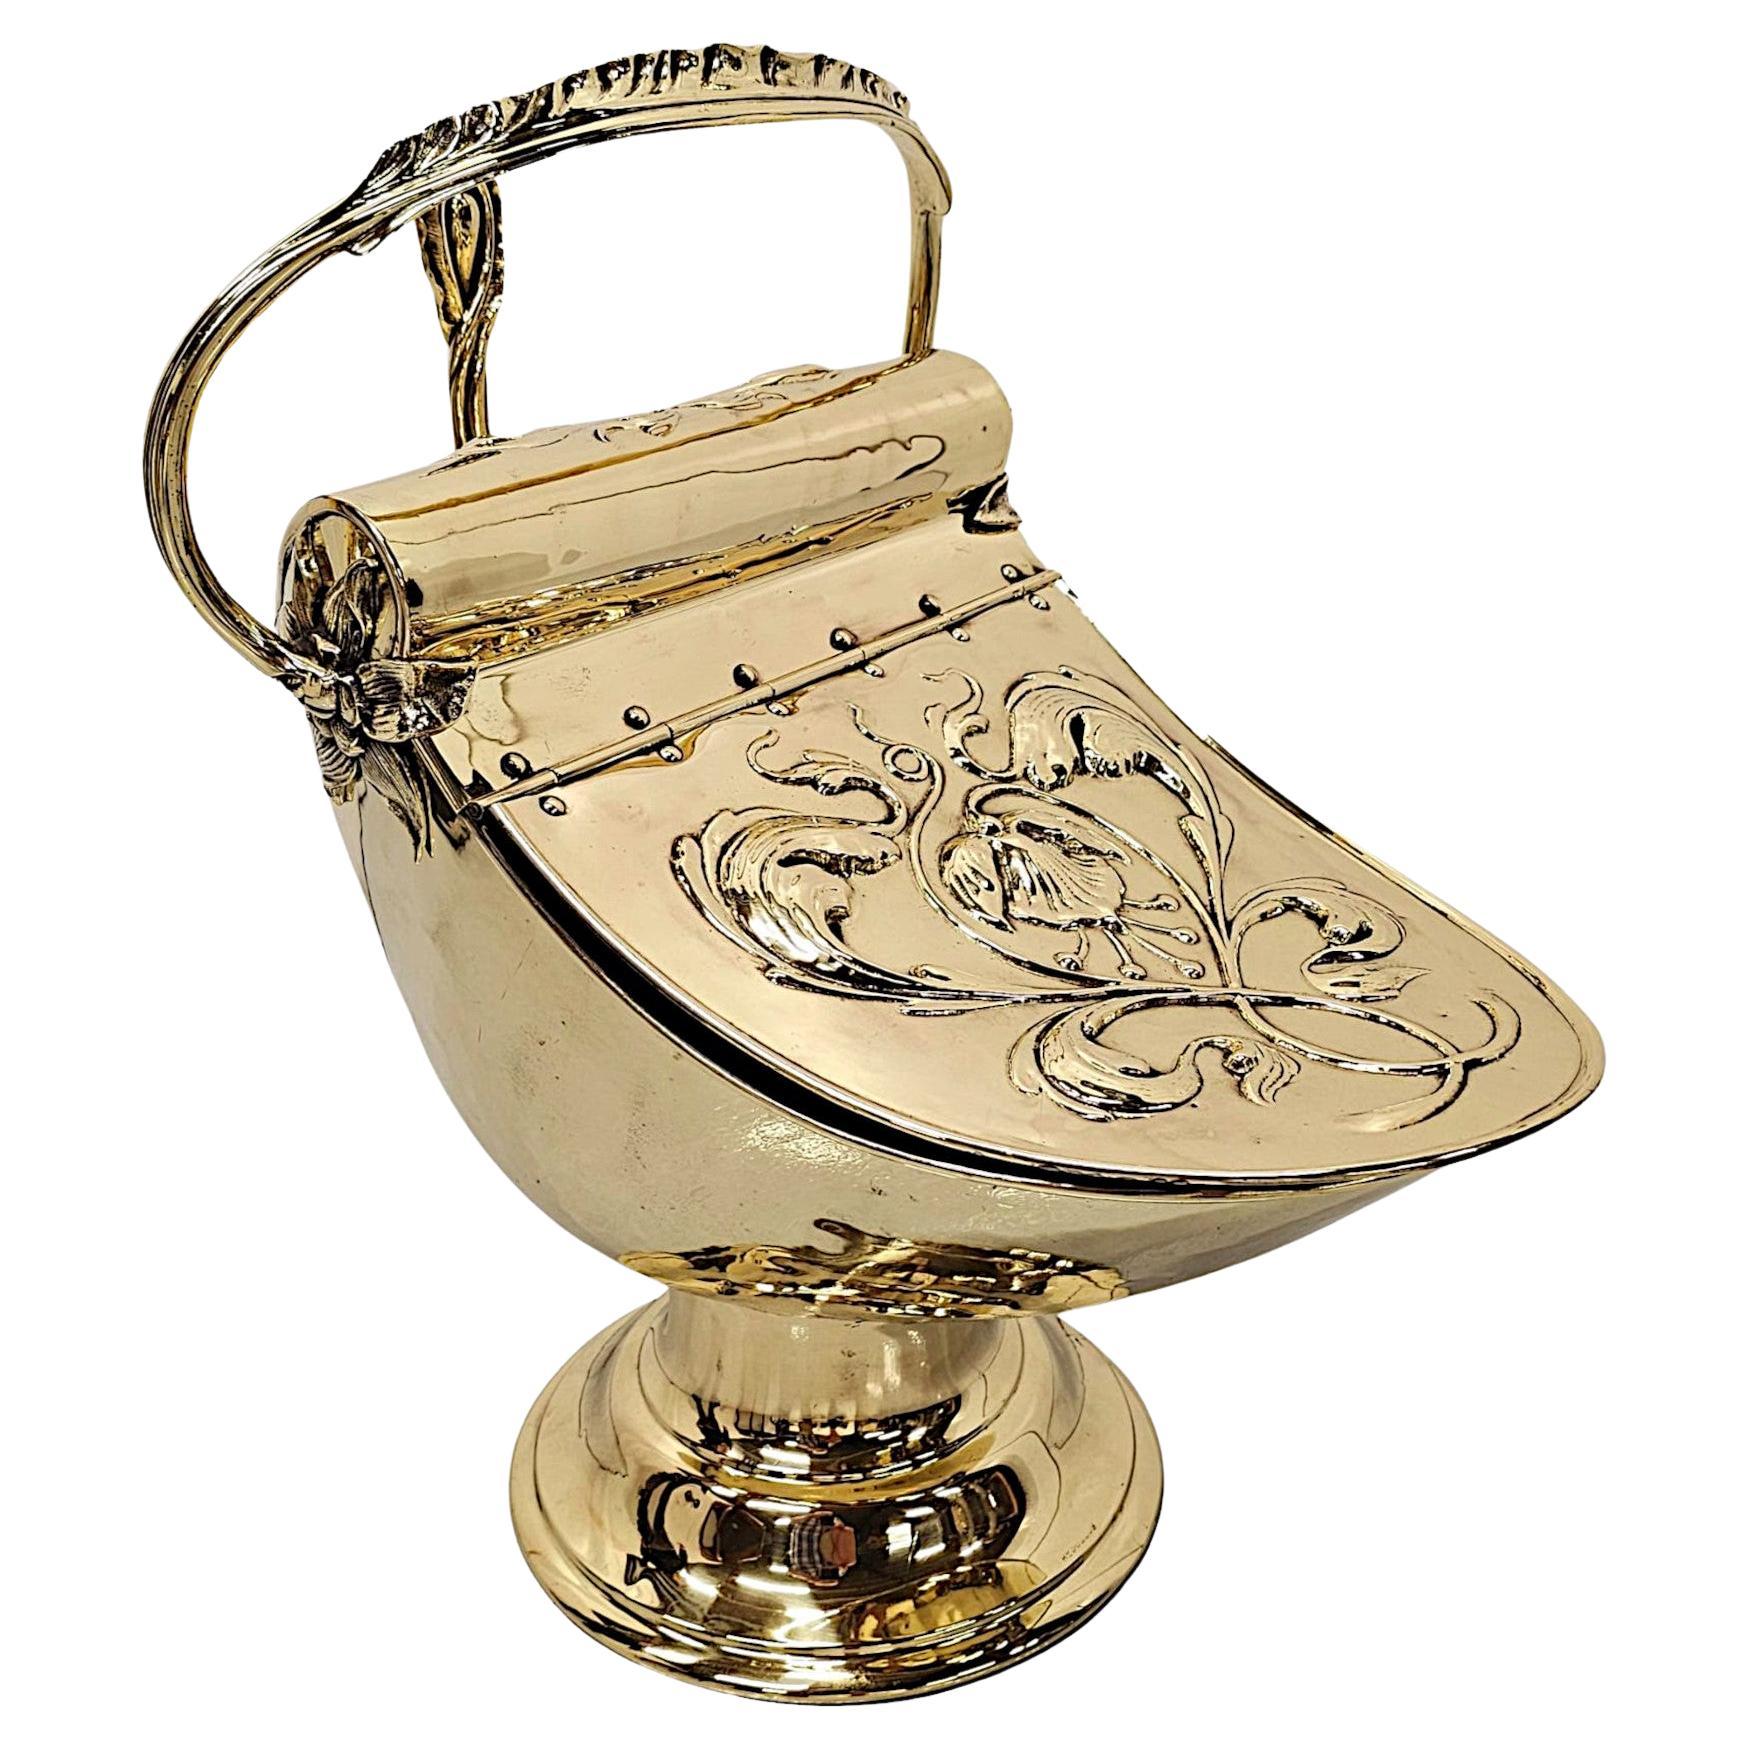 A Very Fine 19th Century Polished Brass Coal Scuttle For Sale